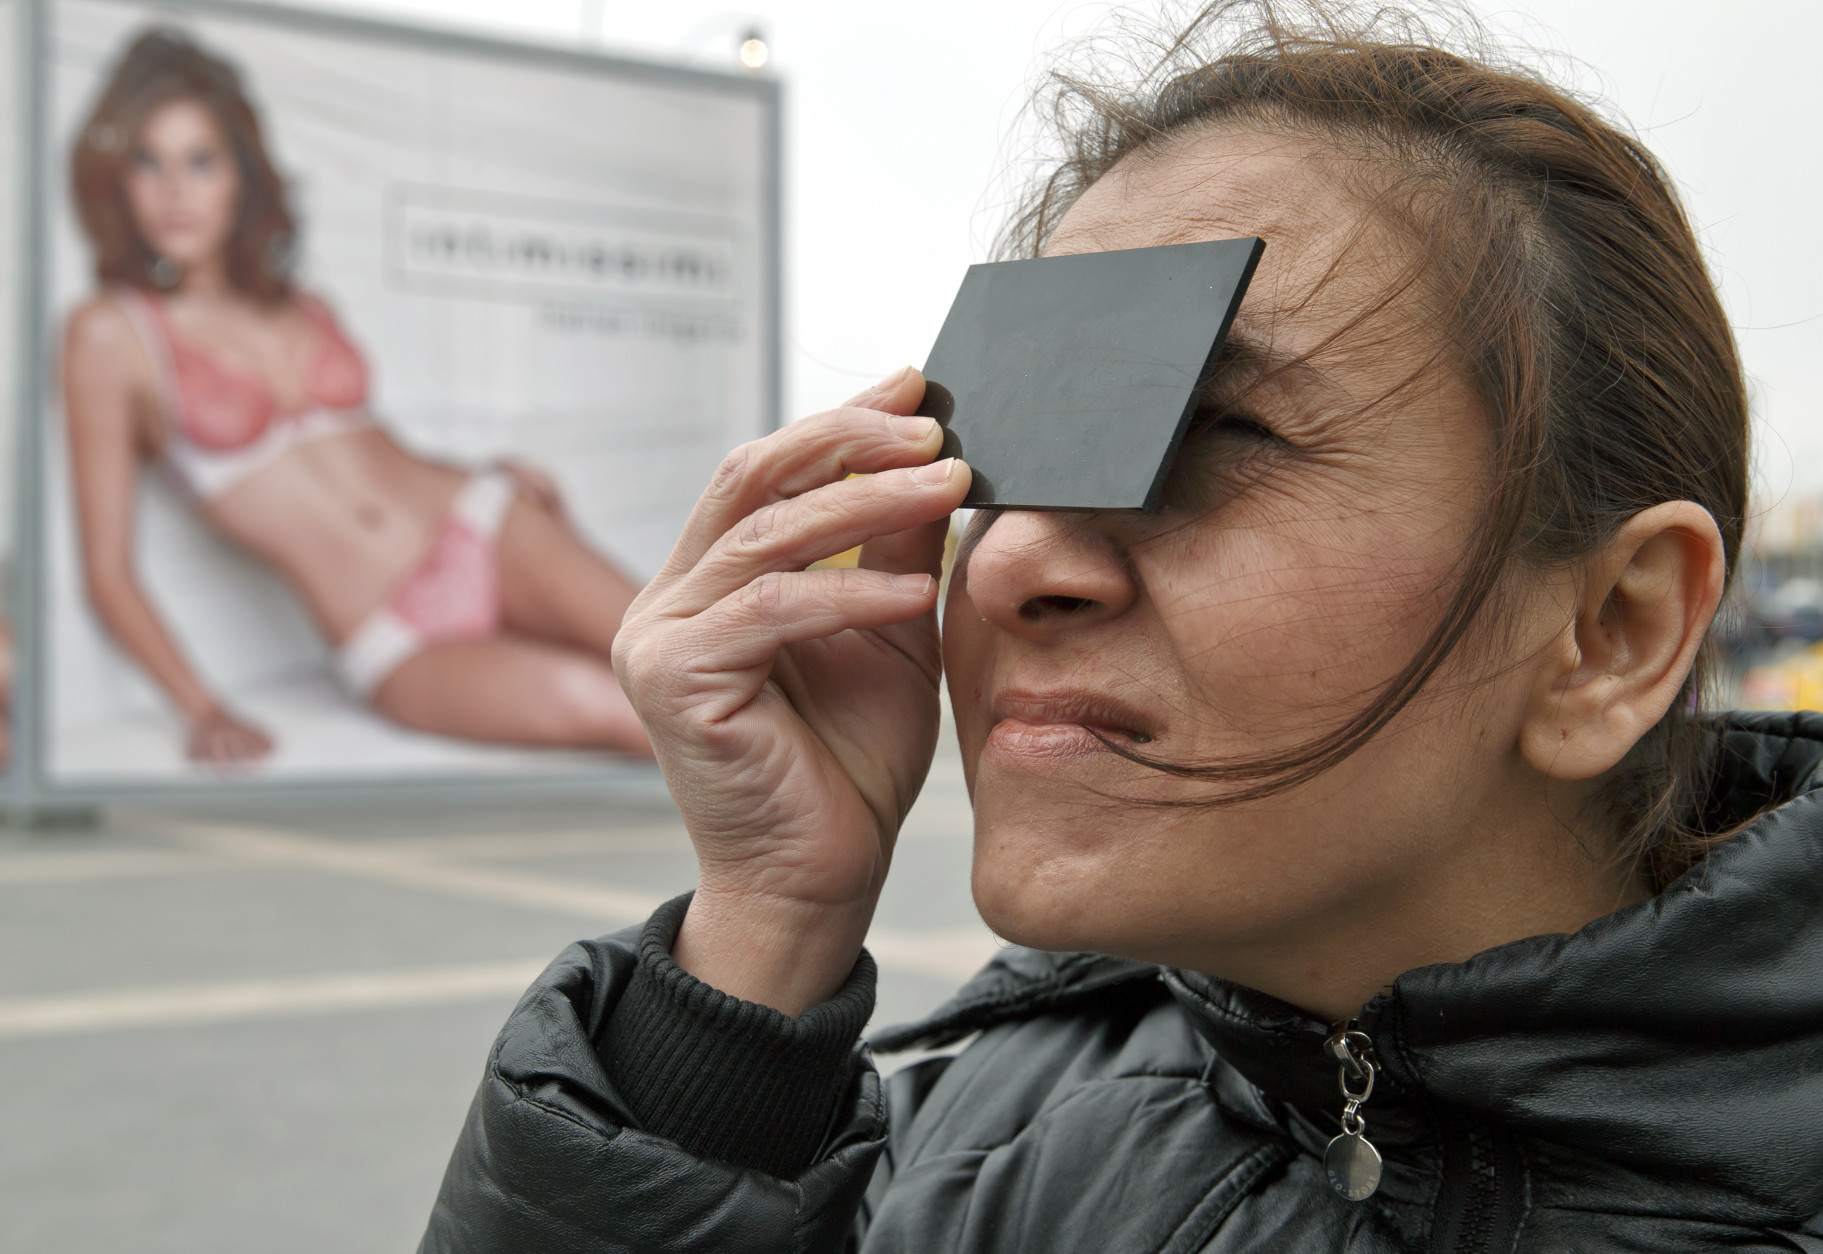 A woman uses tinted glass to watch a solar eclipse through a telescope outside a shopping mall in Bucharest, Romania, Friday, March 20, 2015. Clouds obscured the sun for most of the time the eclipse took place. (AP Photo/Vadim Ghirda)